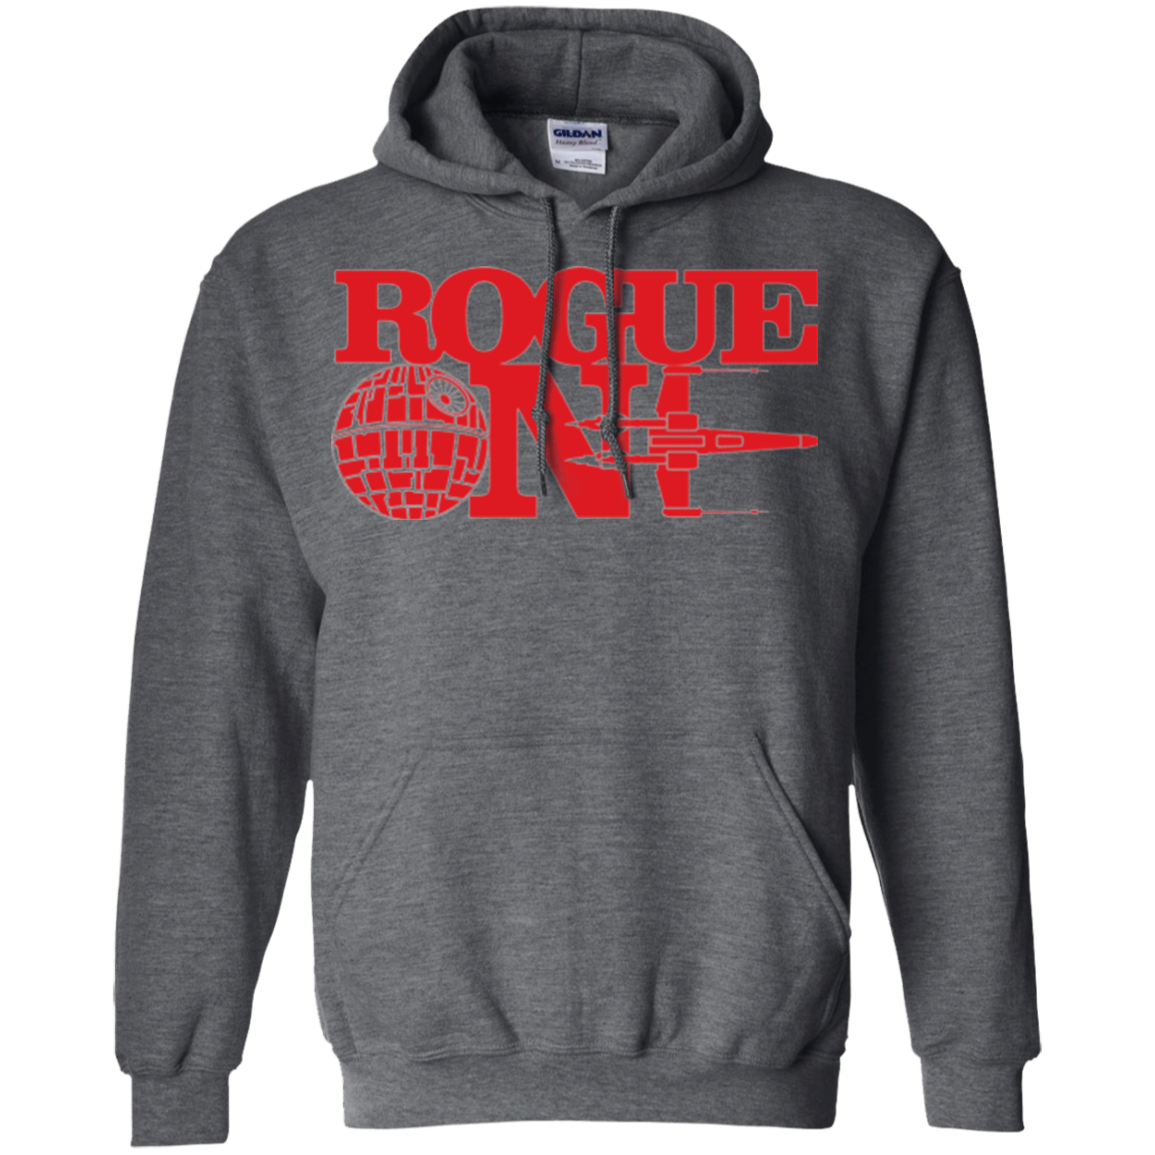 Mission Impossible Pullover Hoodie